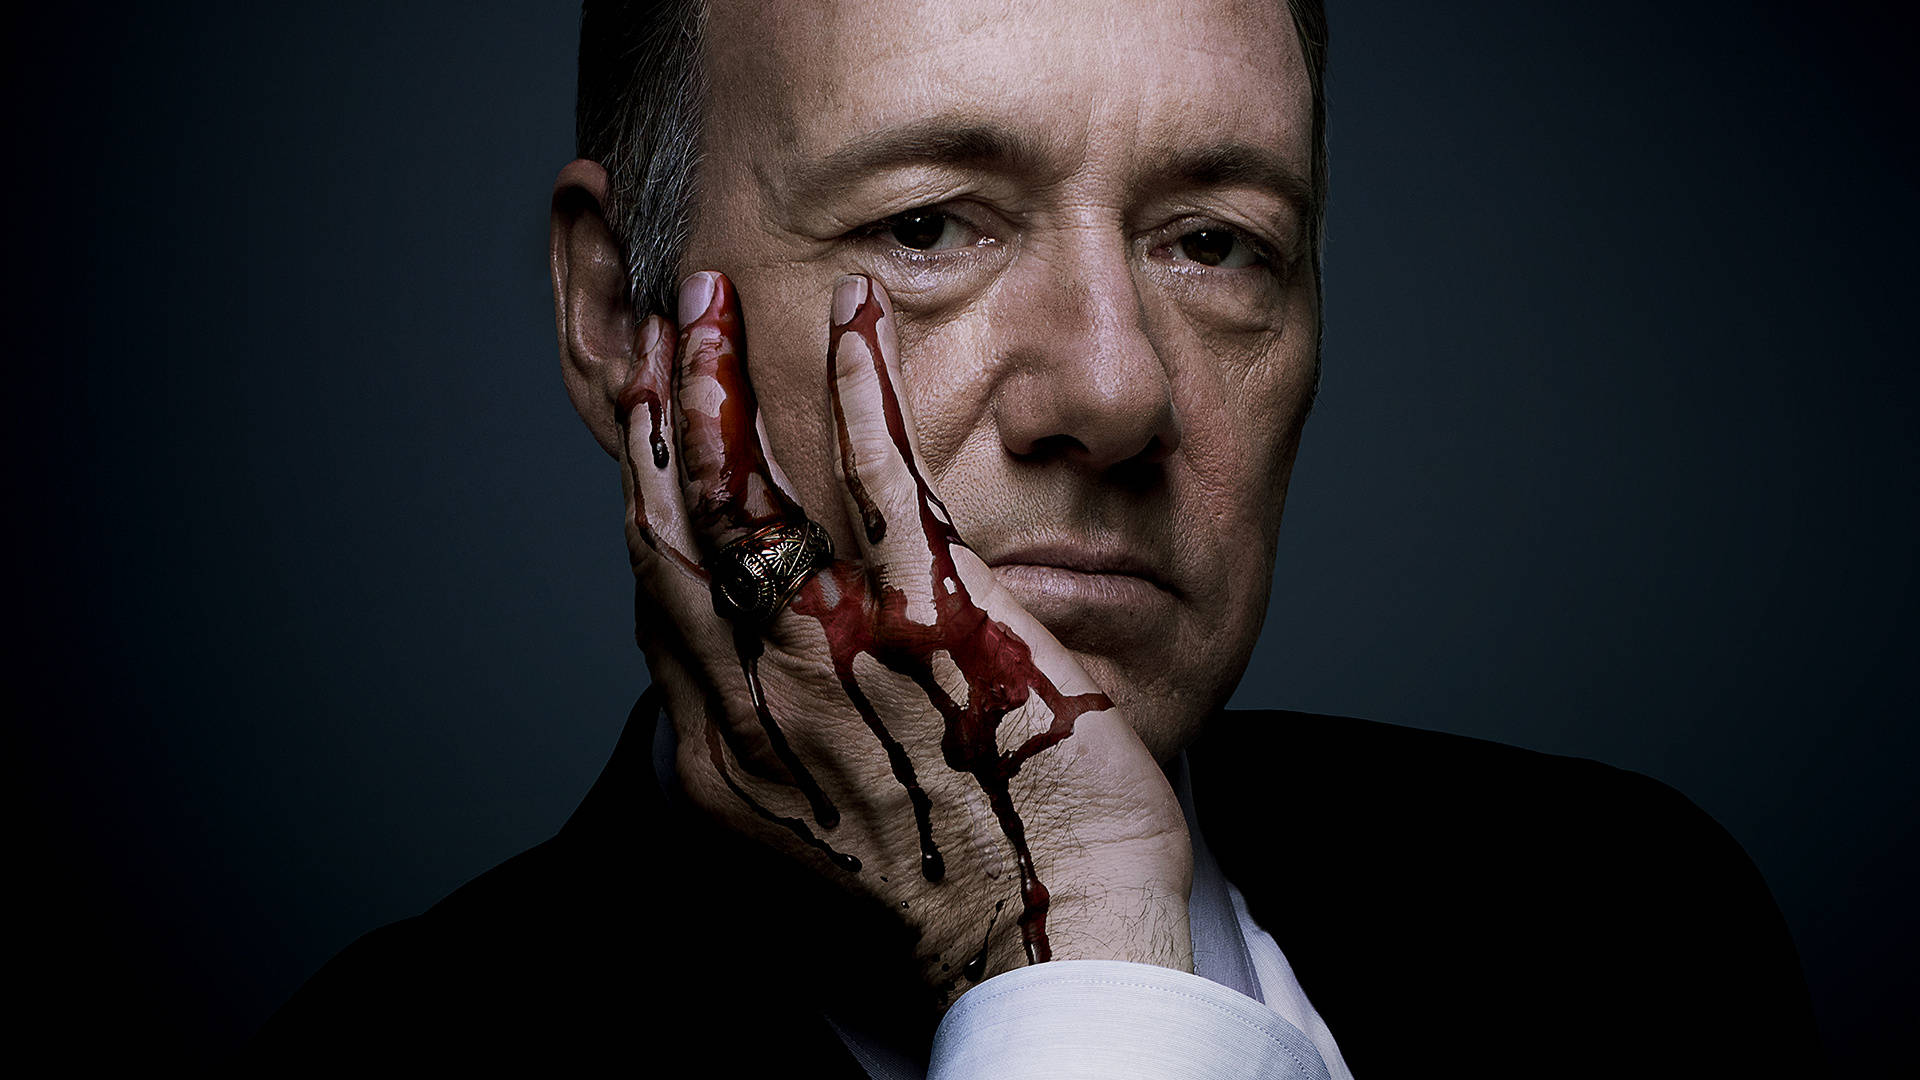 Bloody Hand Of Kevin From House Of Cards Wallpaper